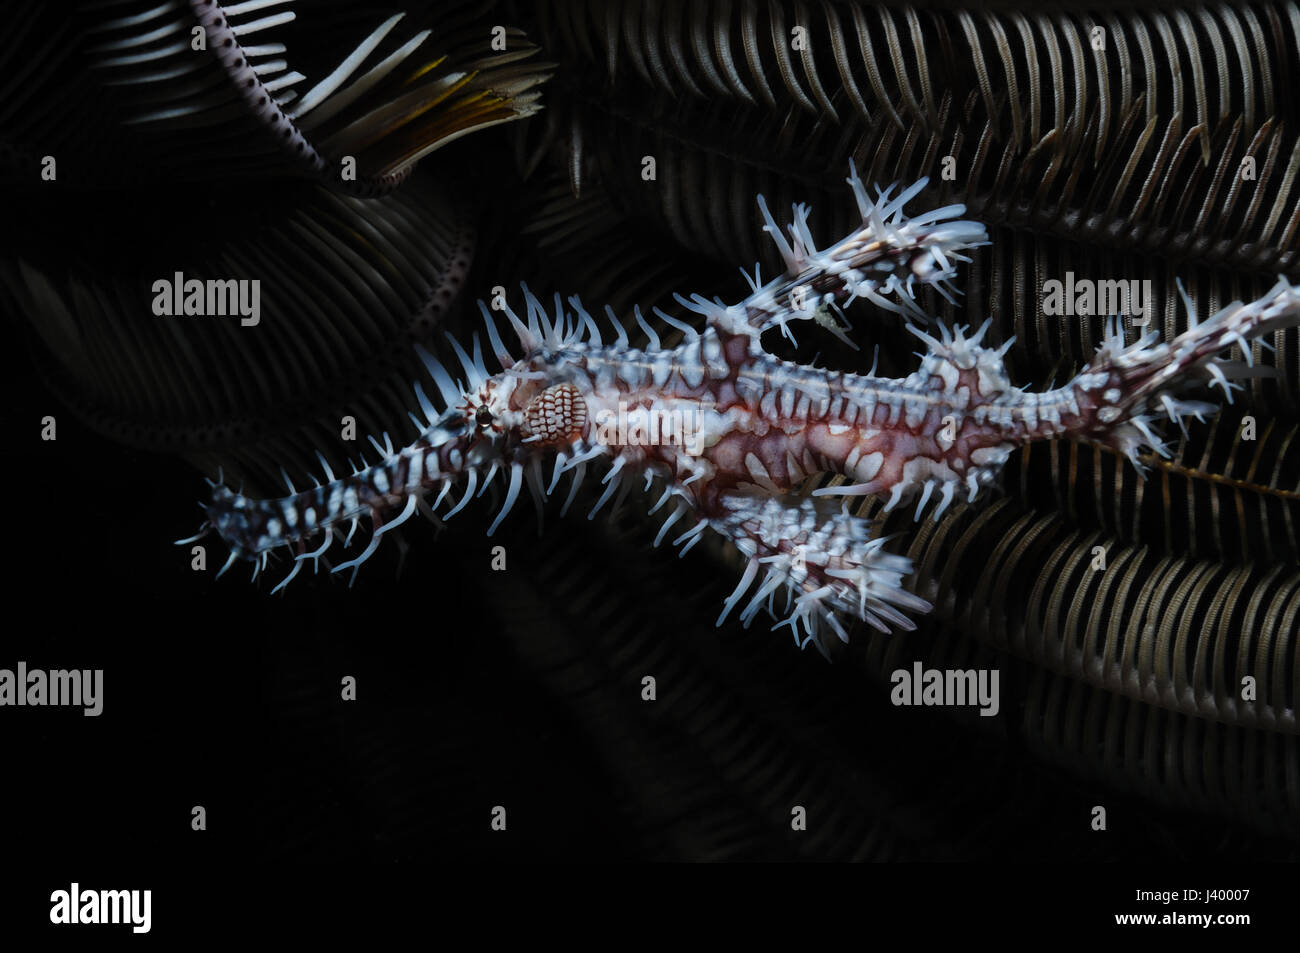 Harlequin ghost pipefish hiding in a crinoid (sea lily), Panglao, Philippines Stock Photo